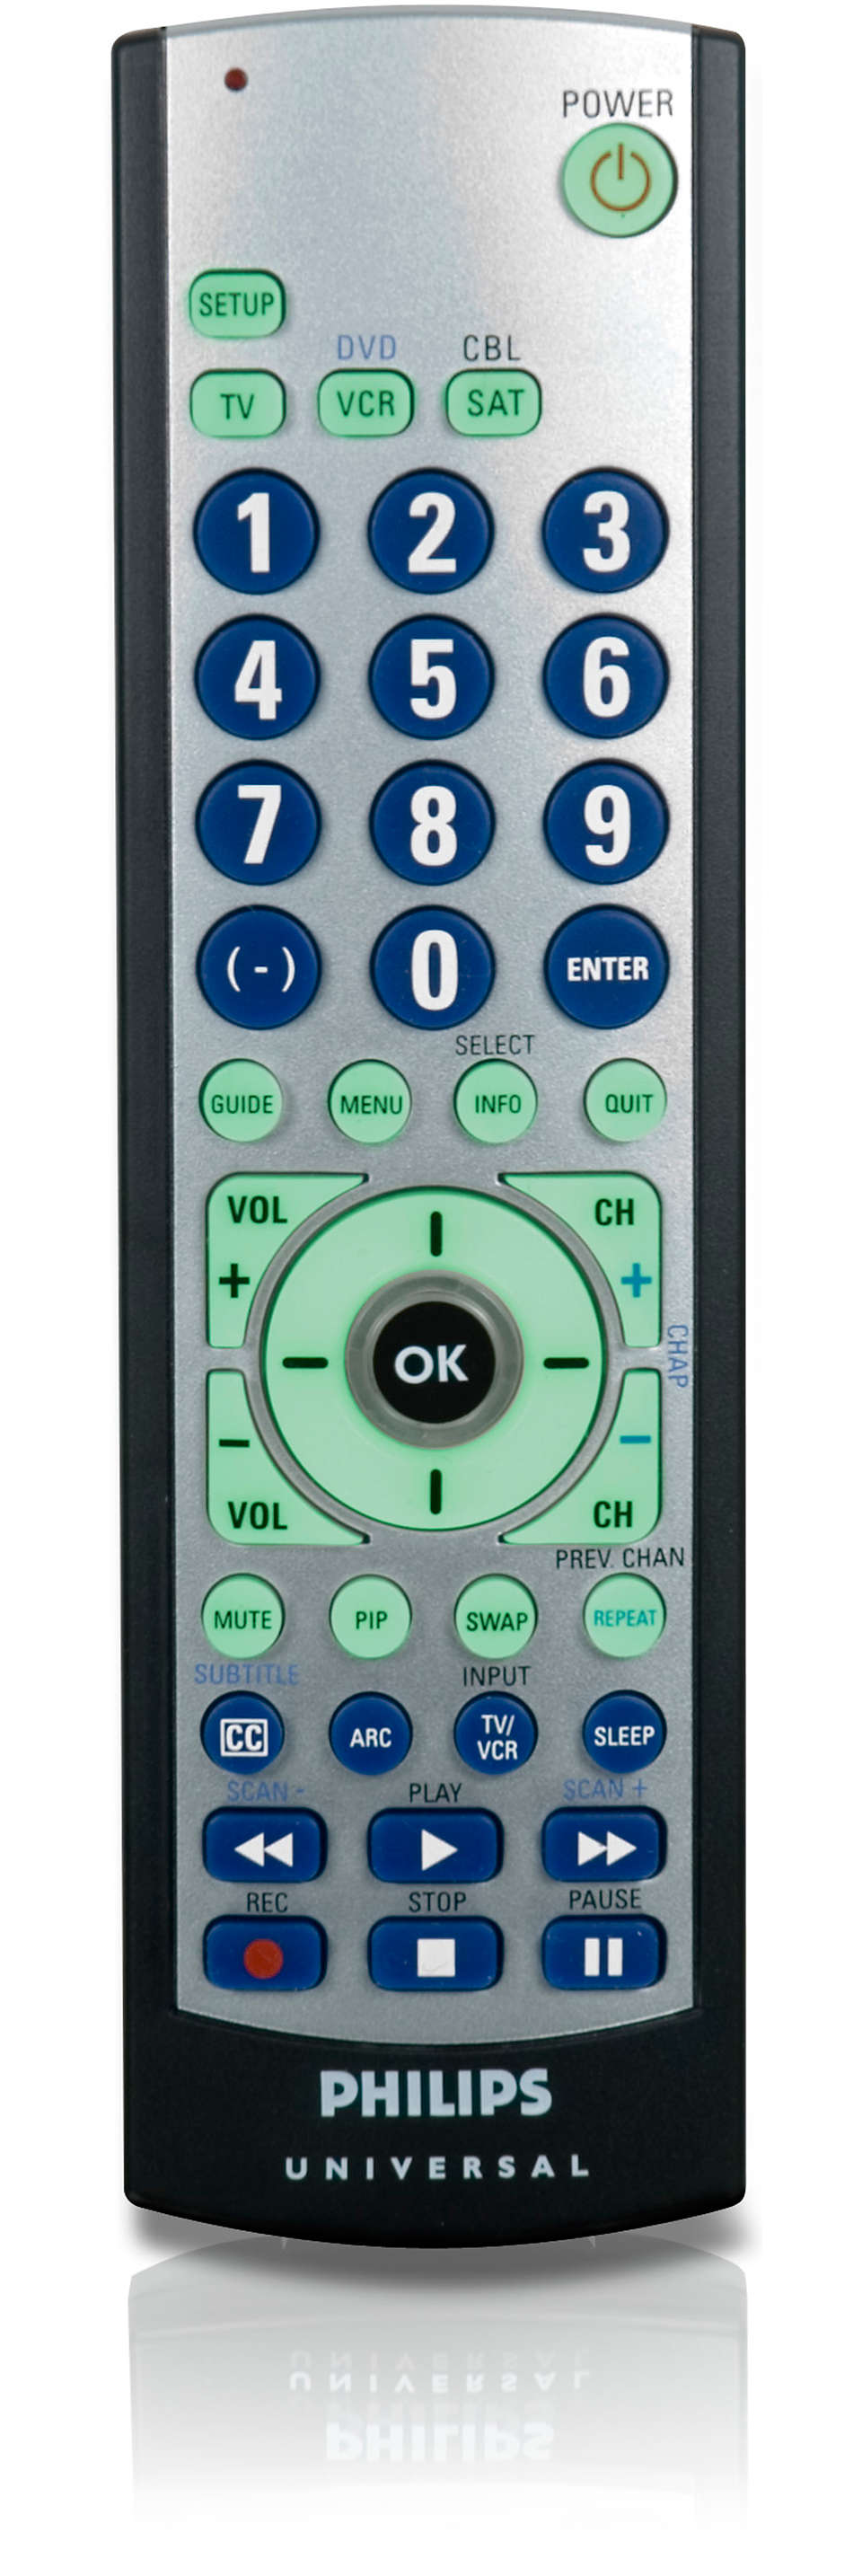 Perfect replacement for lost or broken remote.